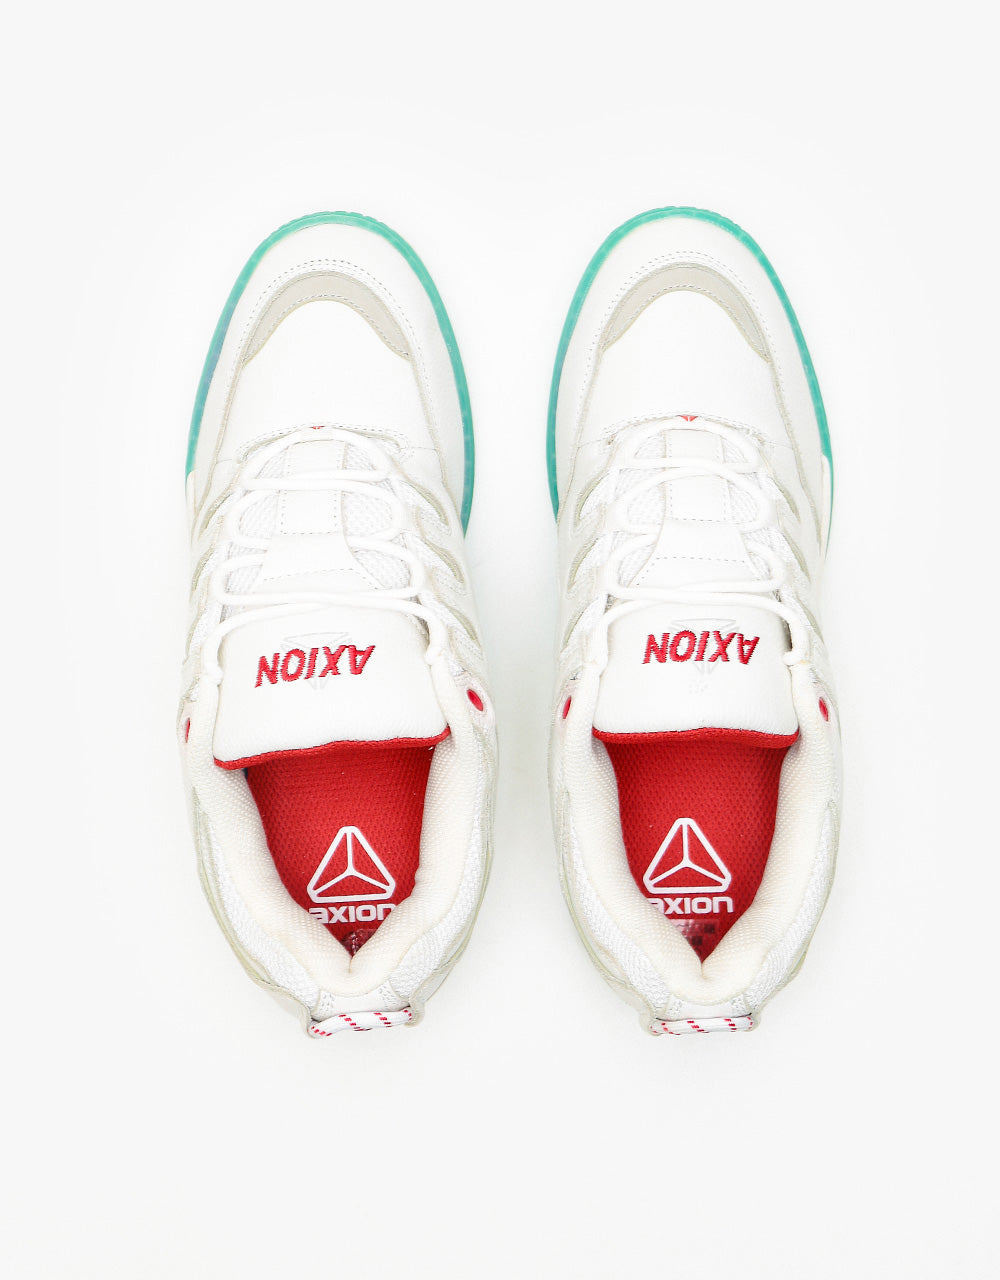 Axion Offical Skate Shoes - White/Grey/Red/Clear